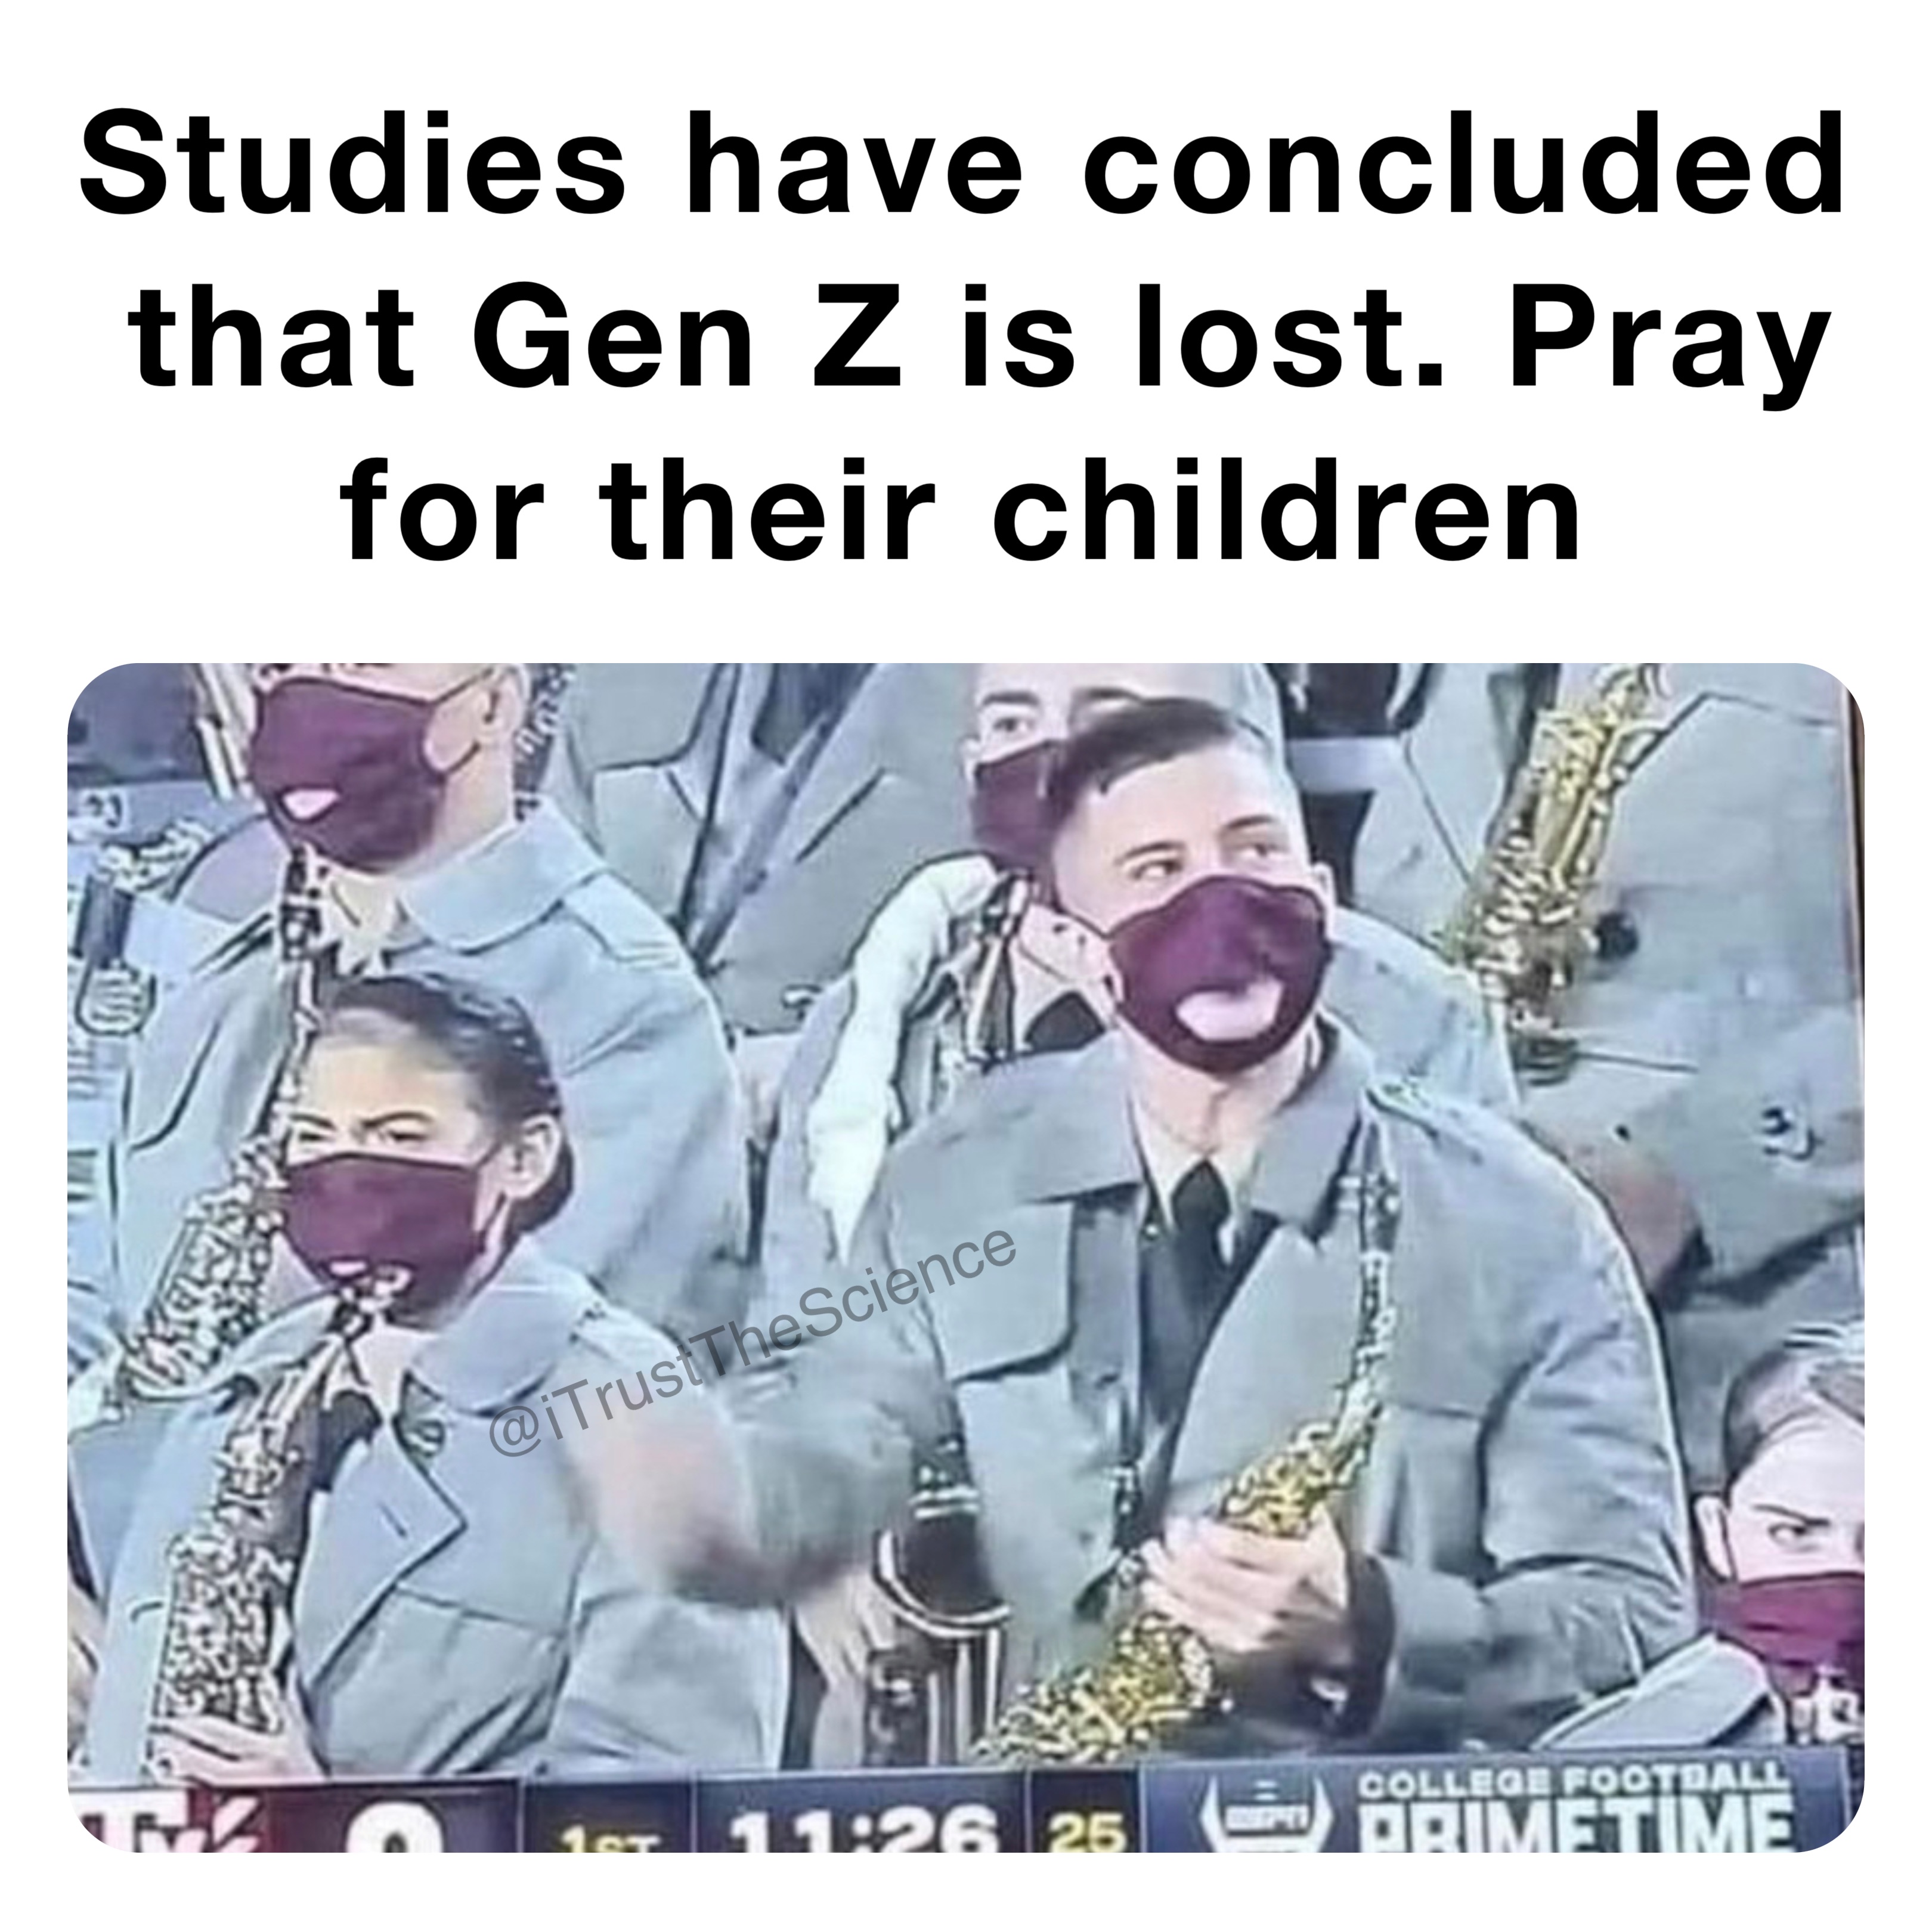 Studies have concluded that Gen Z is lost. Pray for their children